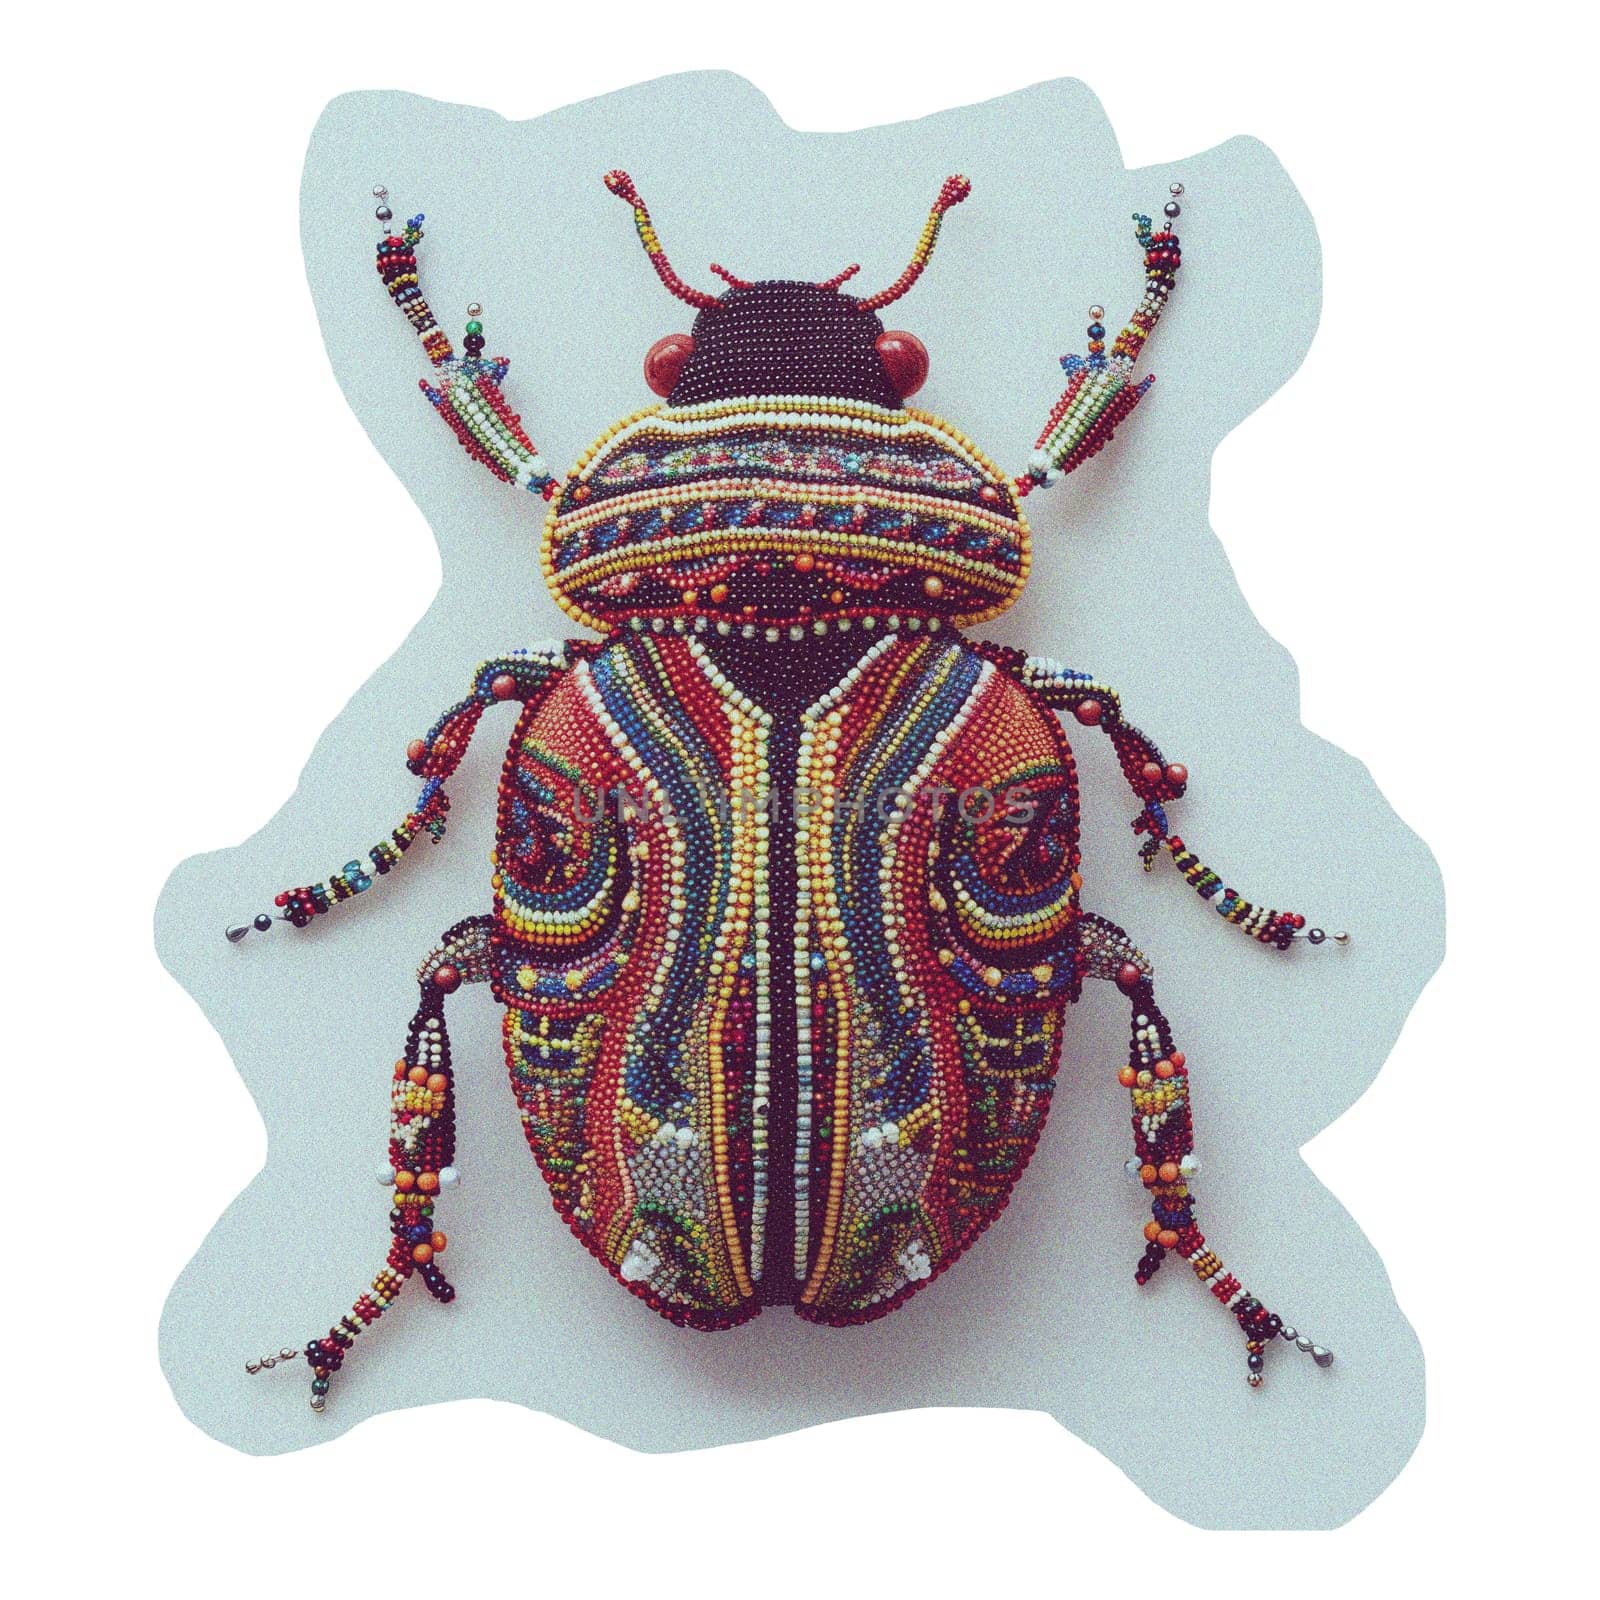 Decorative beetle with beaded patterns by Dustick